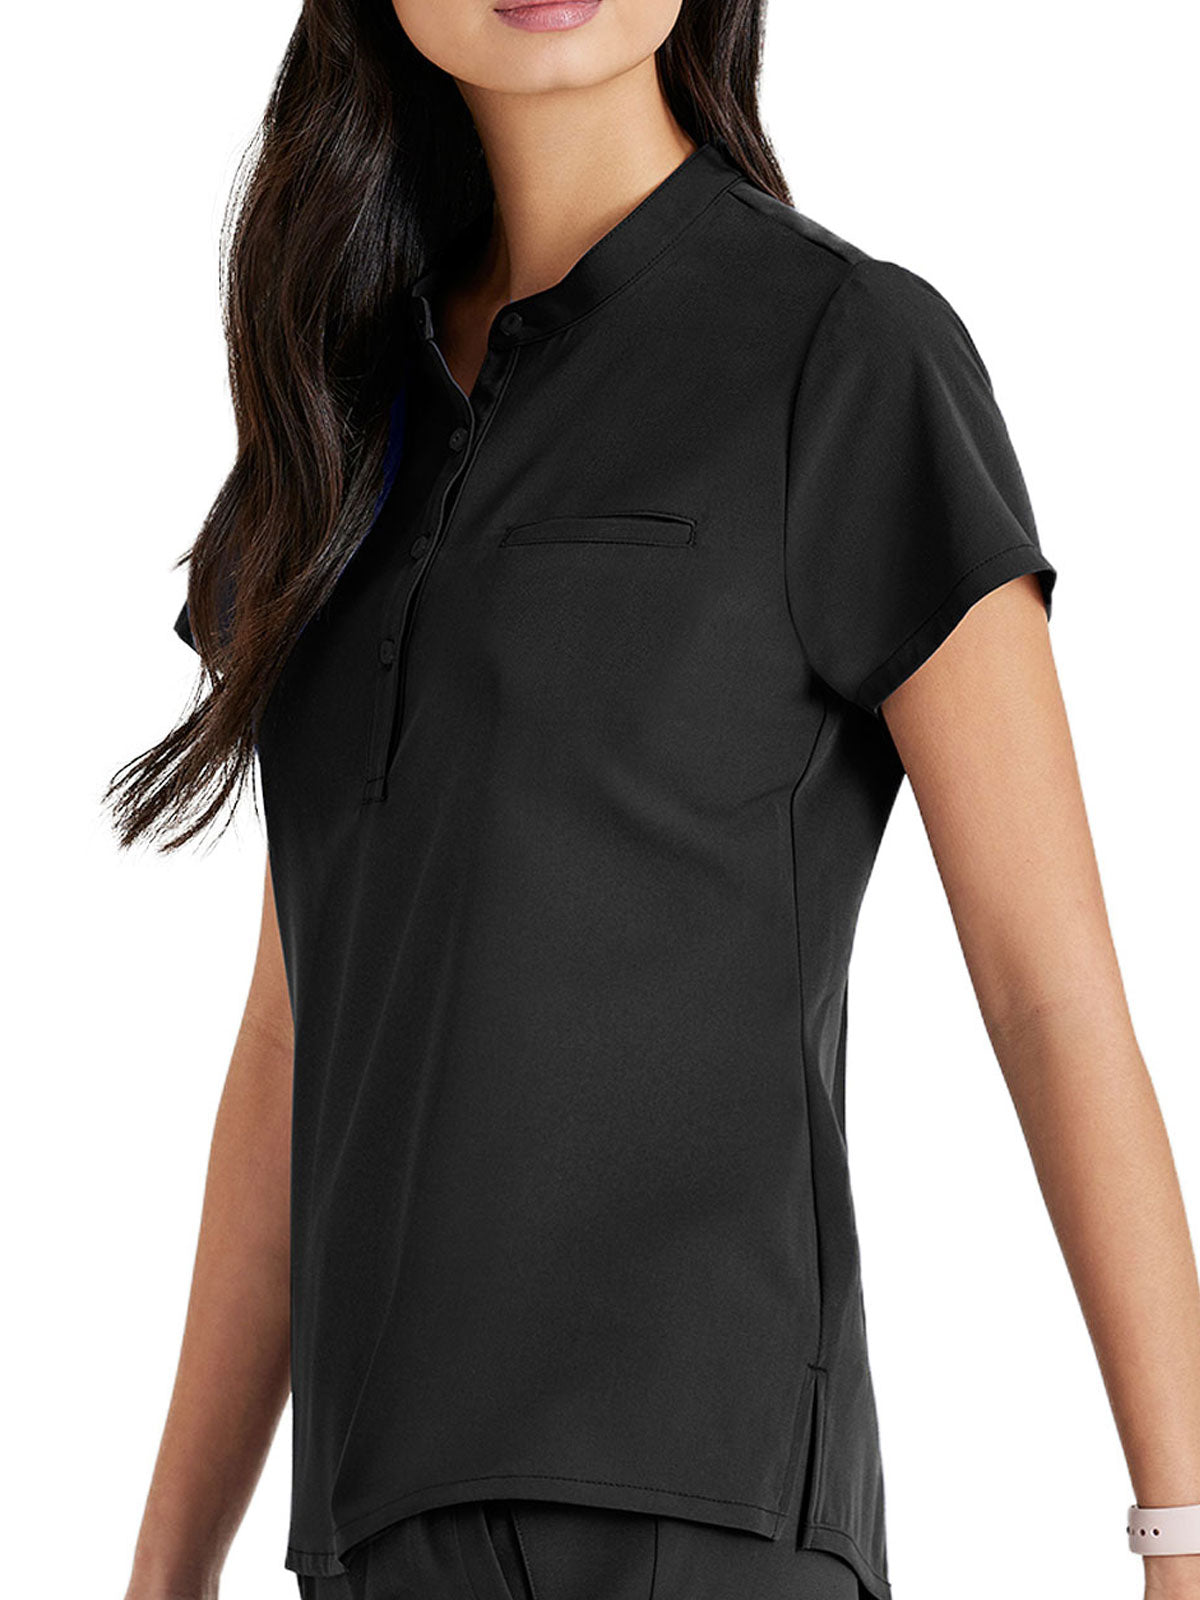 Unify - Women's Collar Tuck In Mission Top